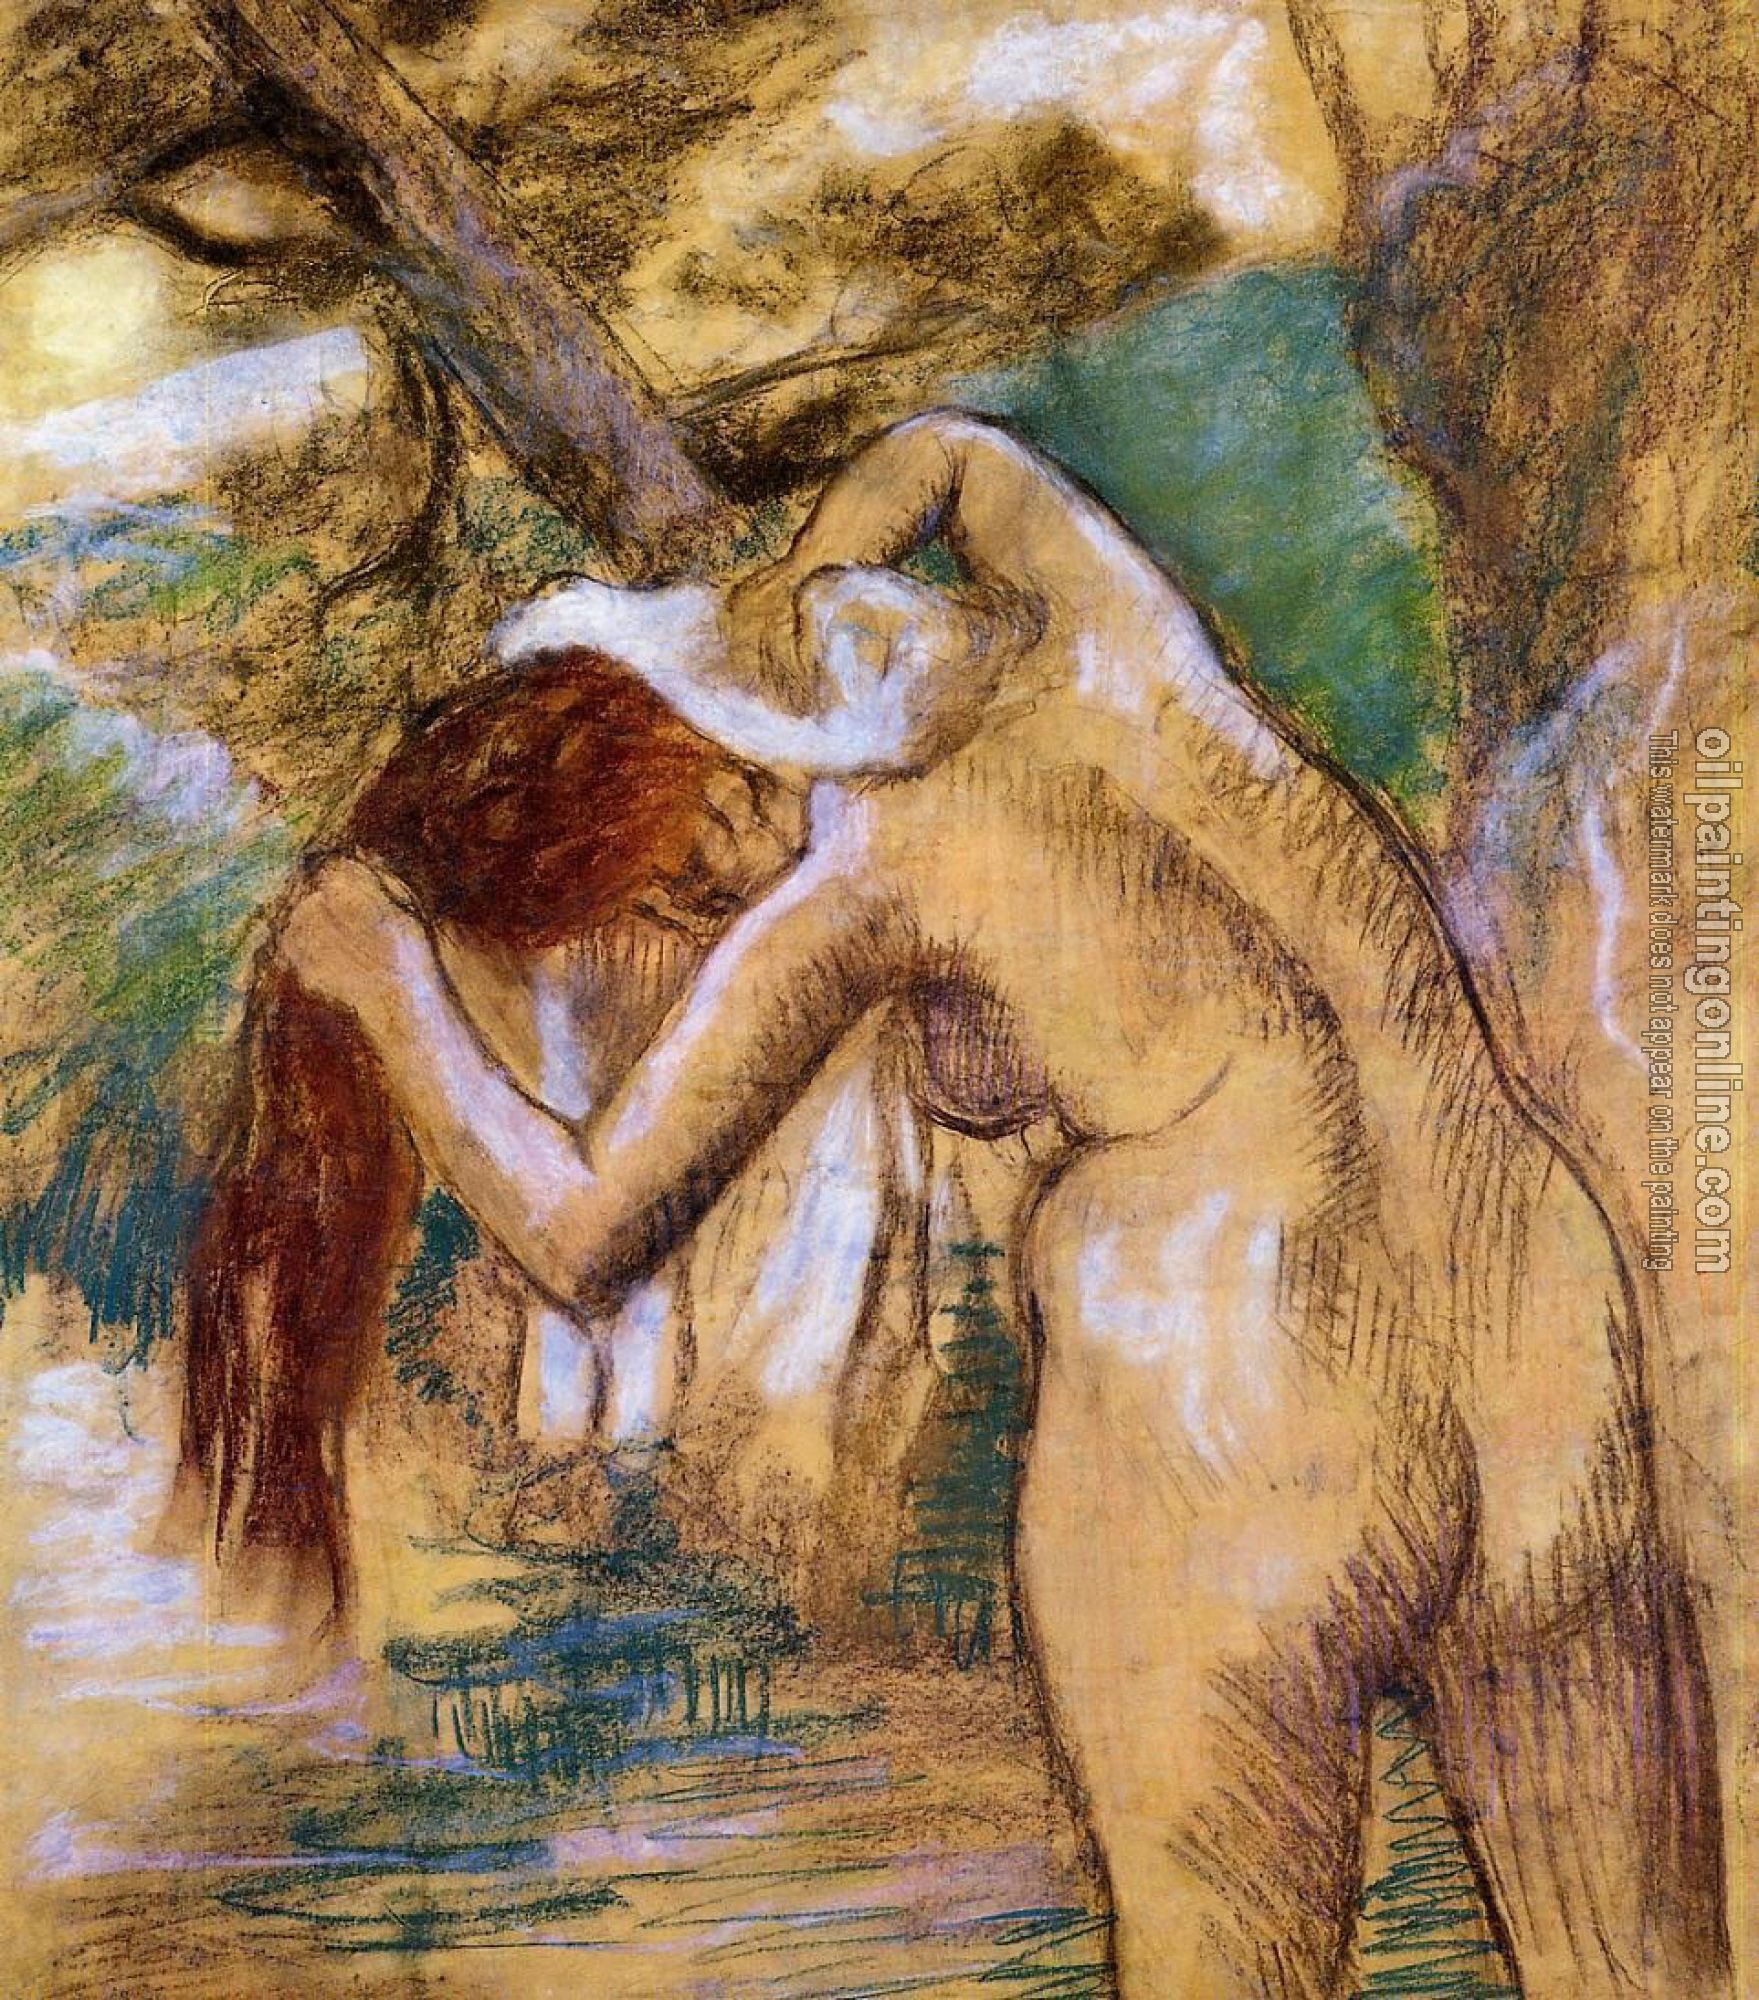 Degas, Edgar - Bather by the Water